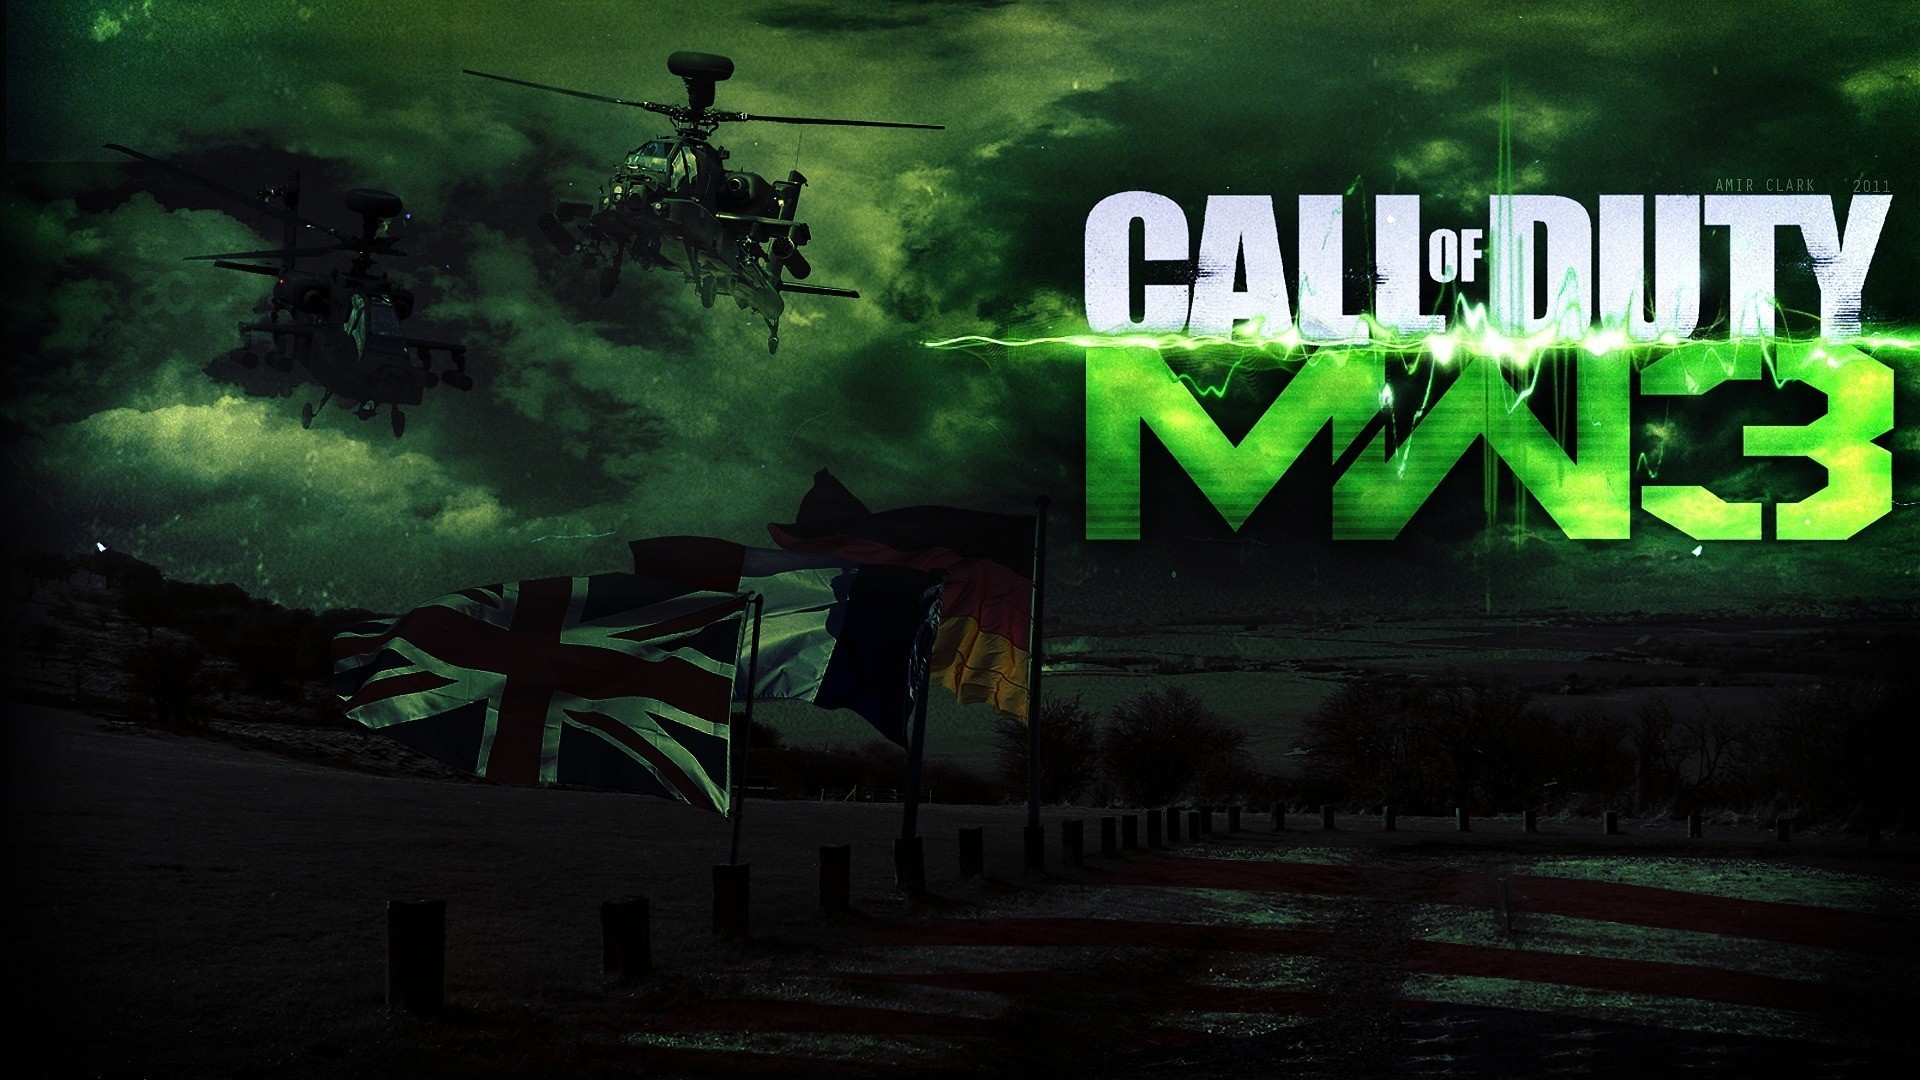 Download Call of Duty MW3 Wallpaper Wallpapers 1920x1080